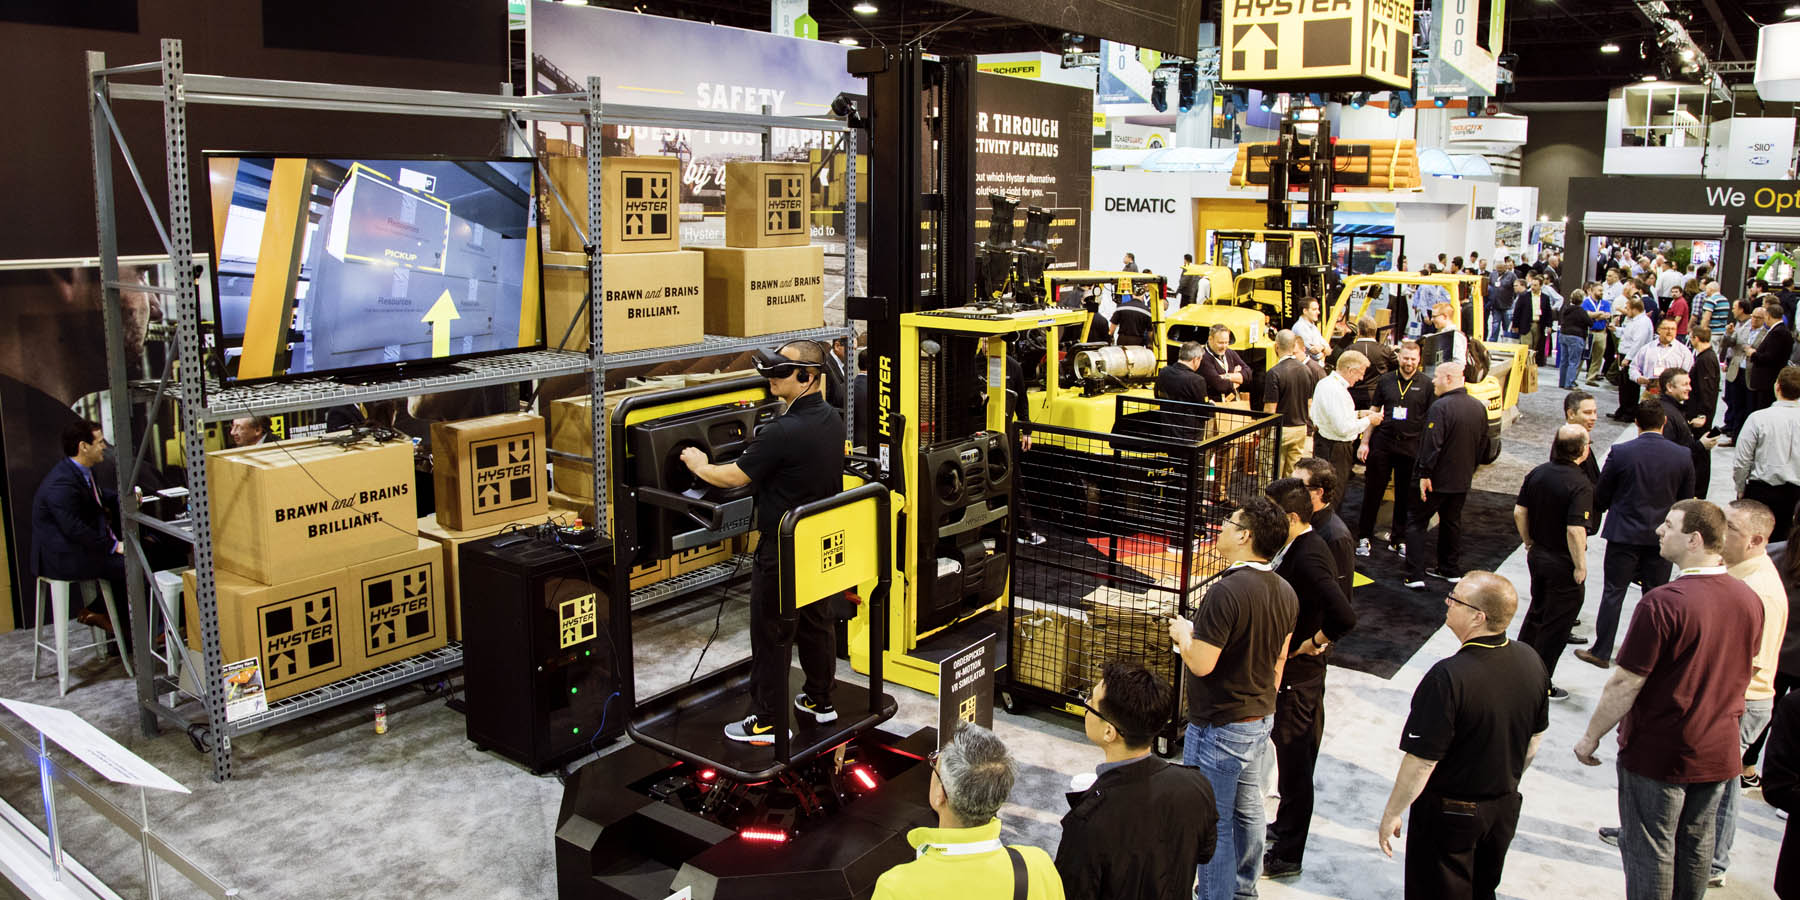 Panoramic view of Hyster exhibit with fork lifts